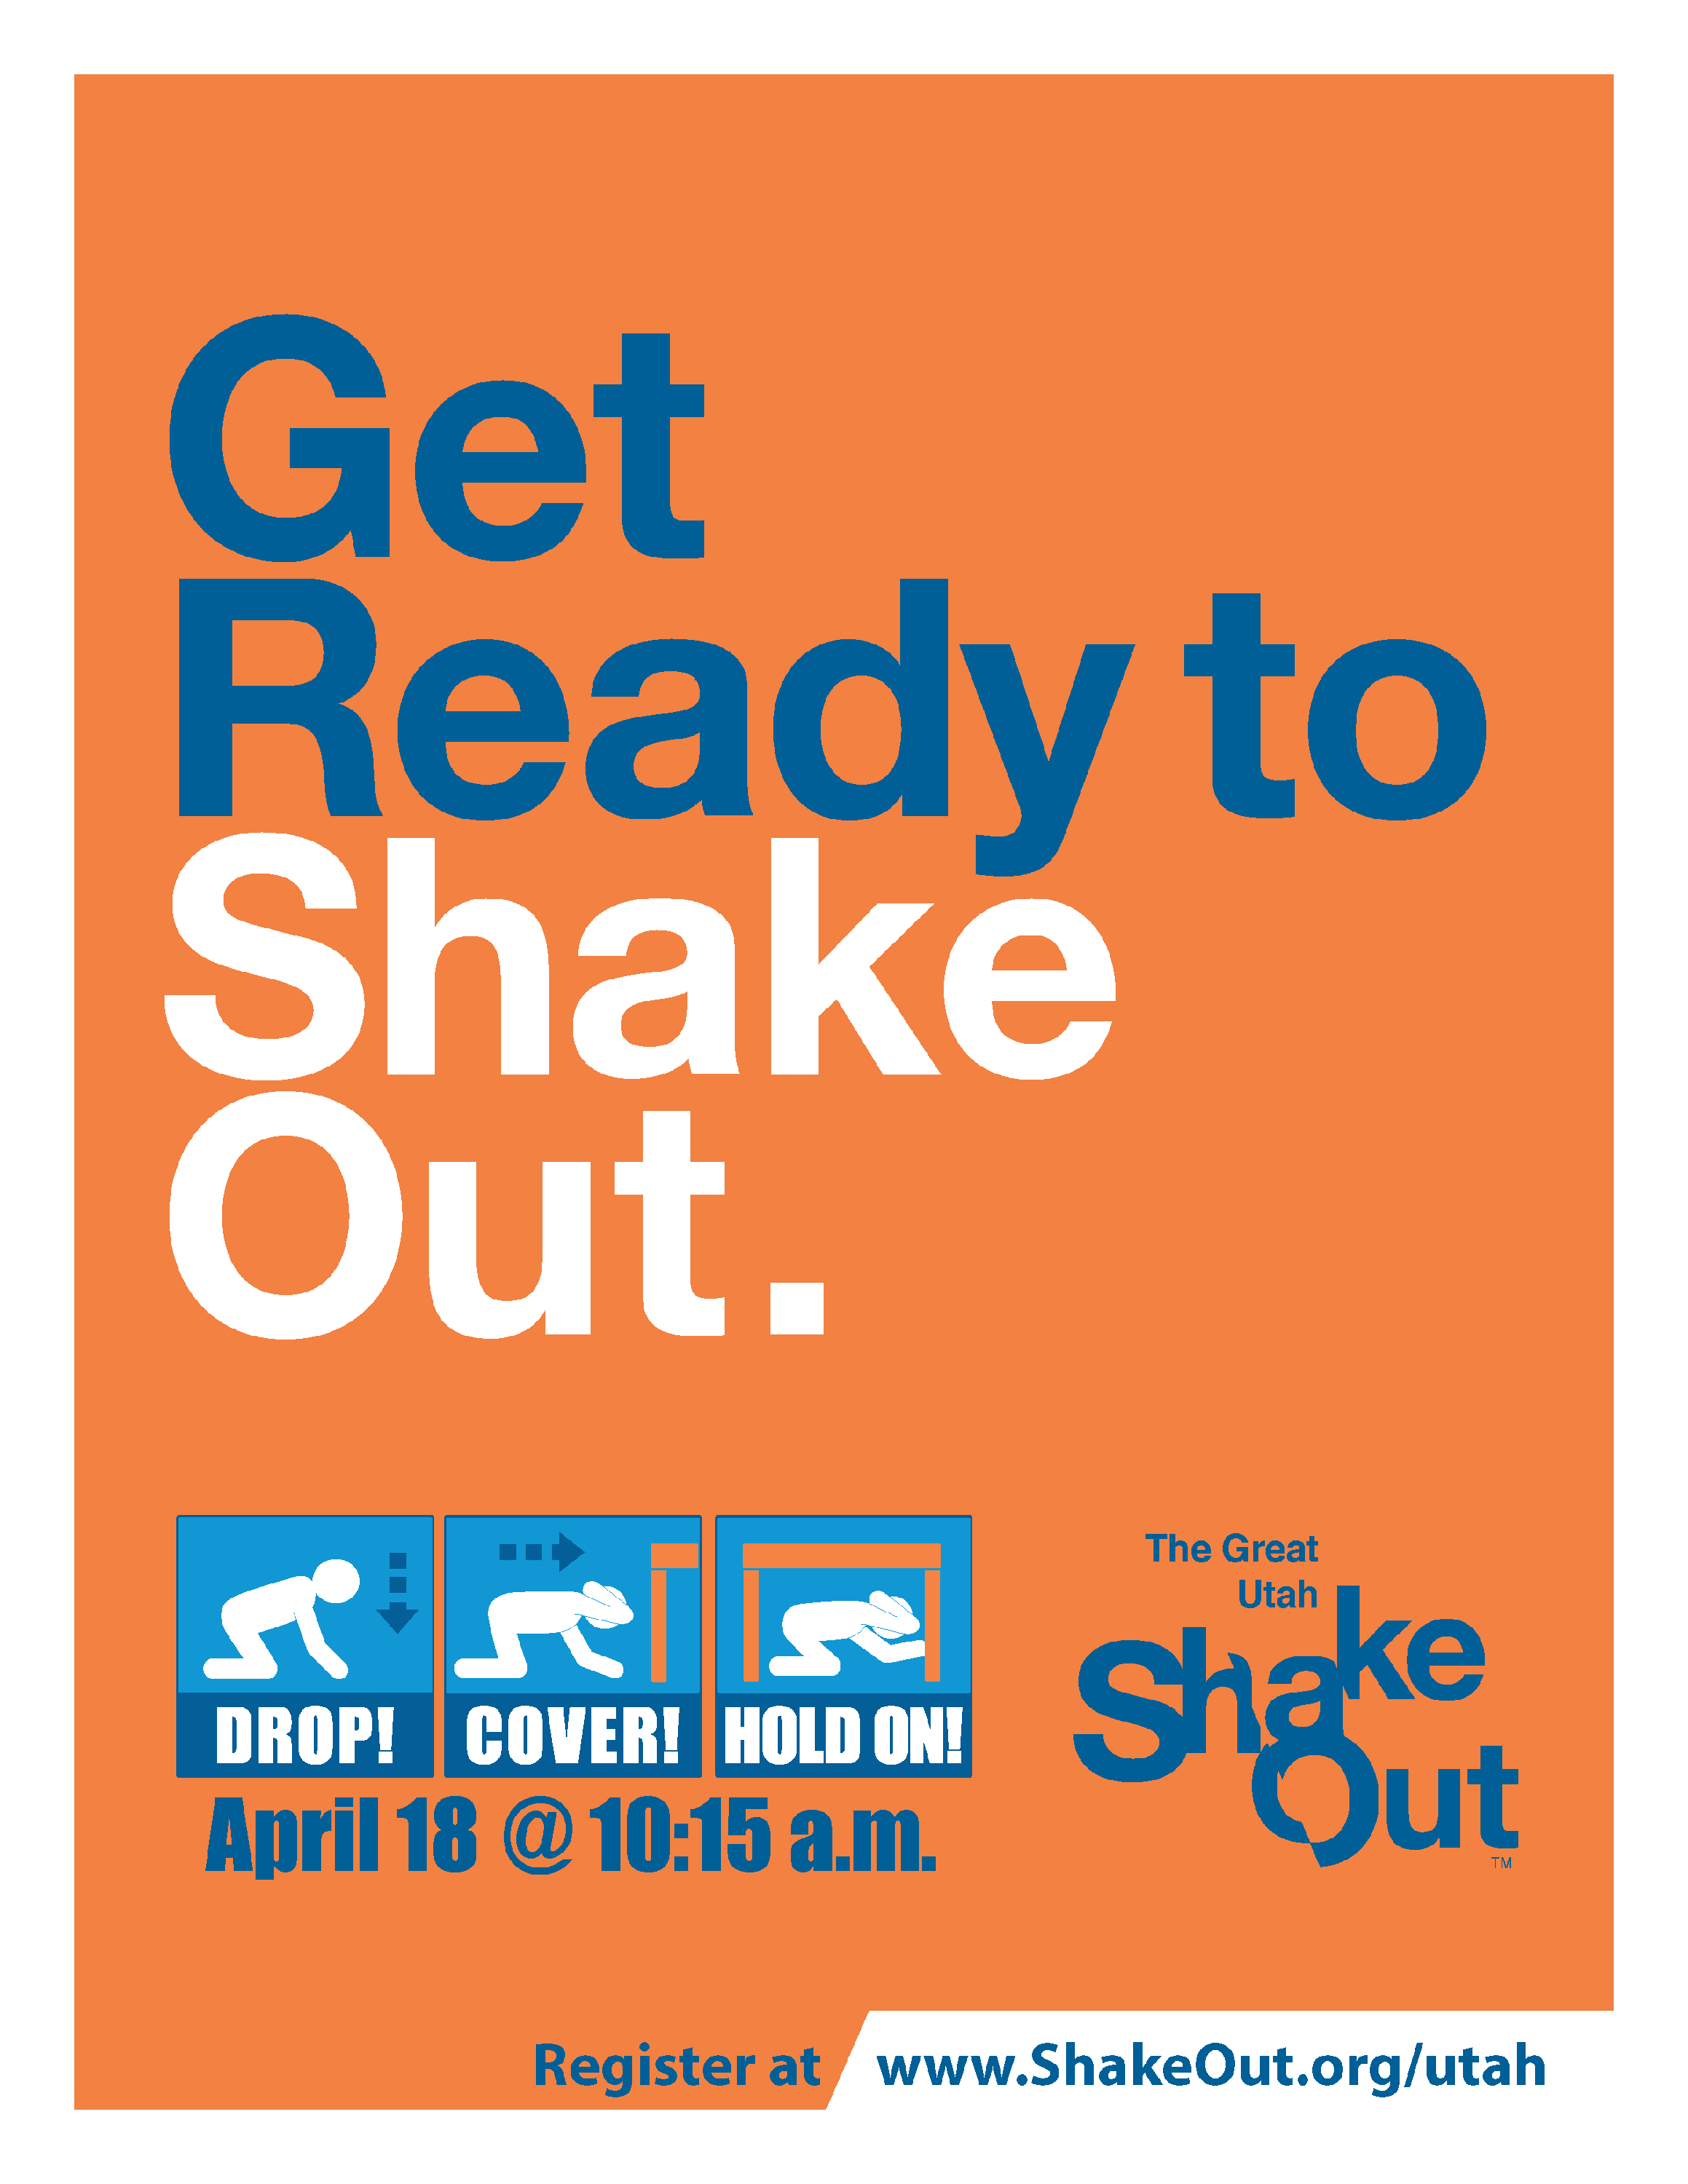 Get ready to shake out. April 18, 2019.